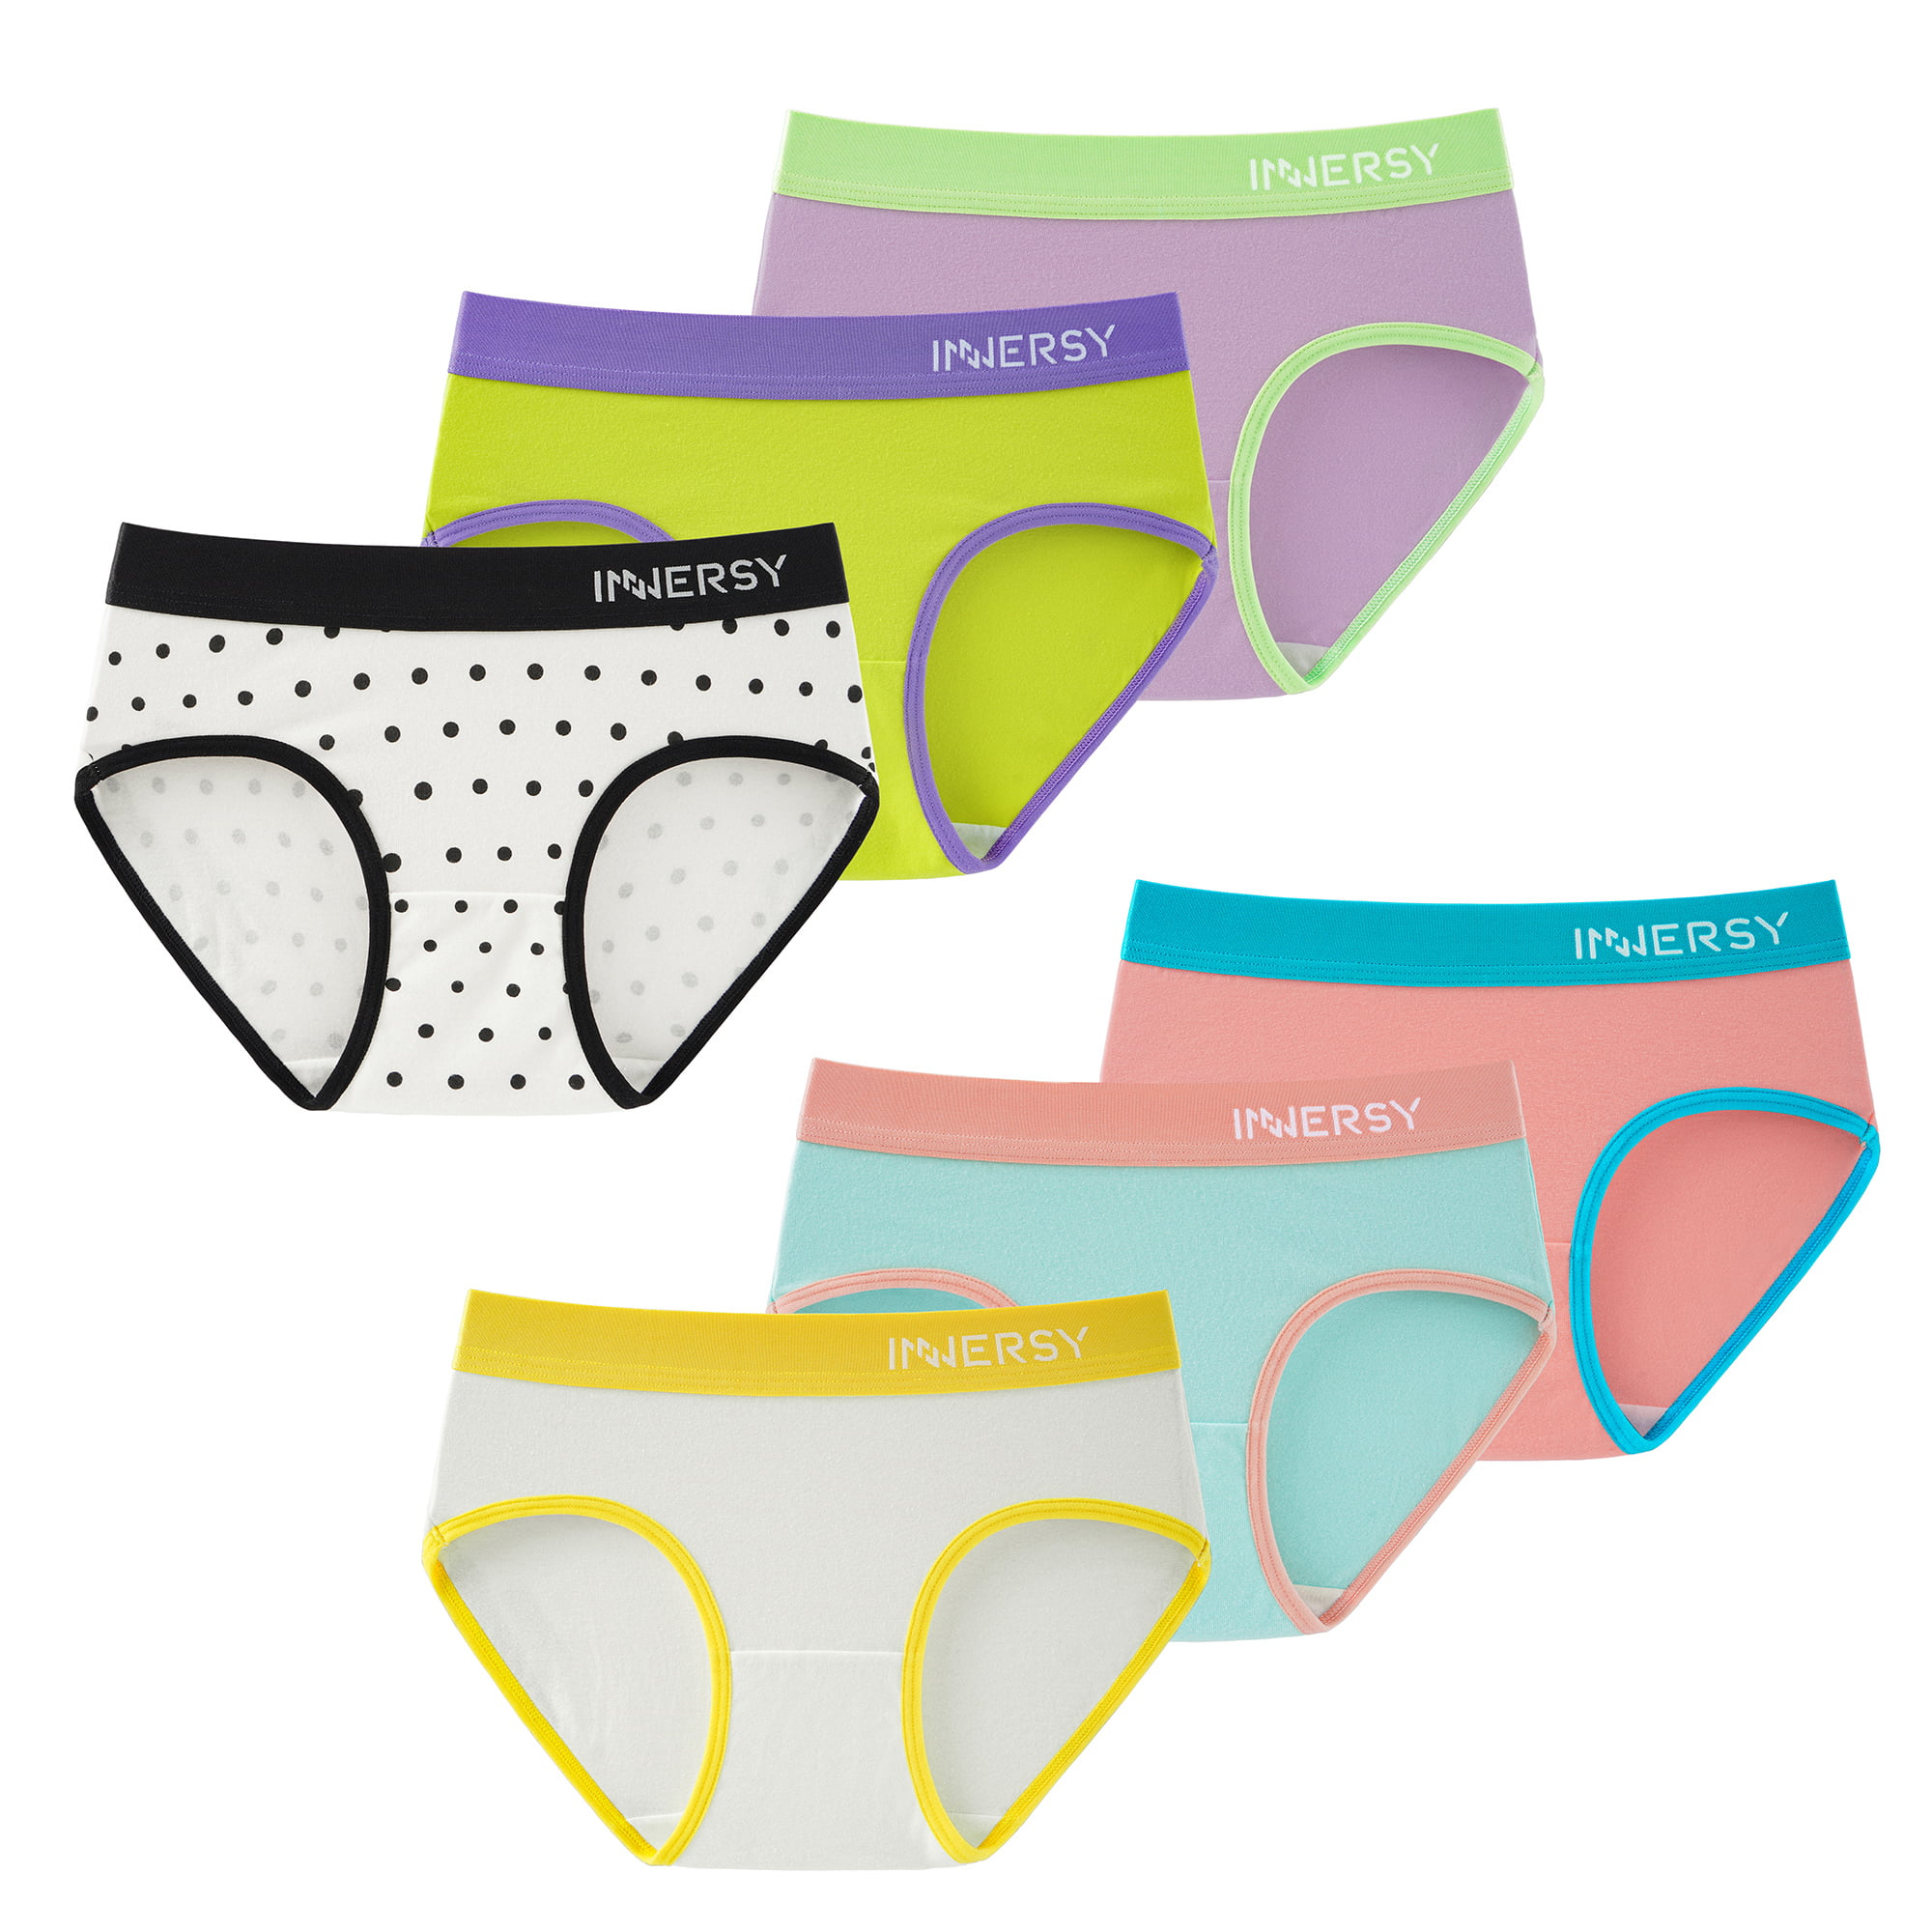 INNERSY Underwear for Girls Cotton Briefs Contrasting Color Teen Panties  Pack of 6 (L(12-14 yrs), Brights) 